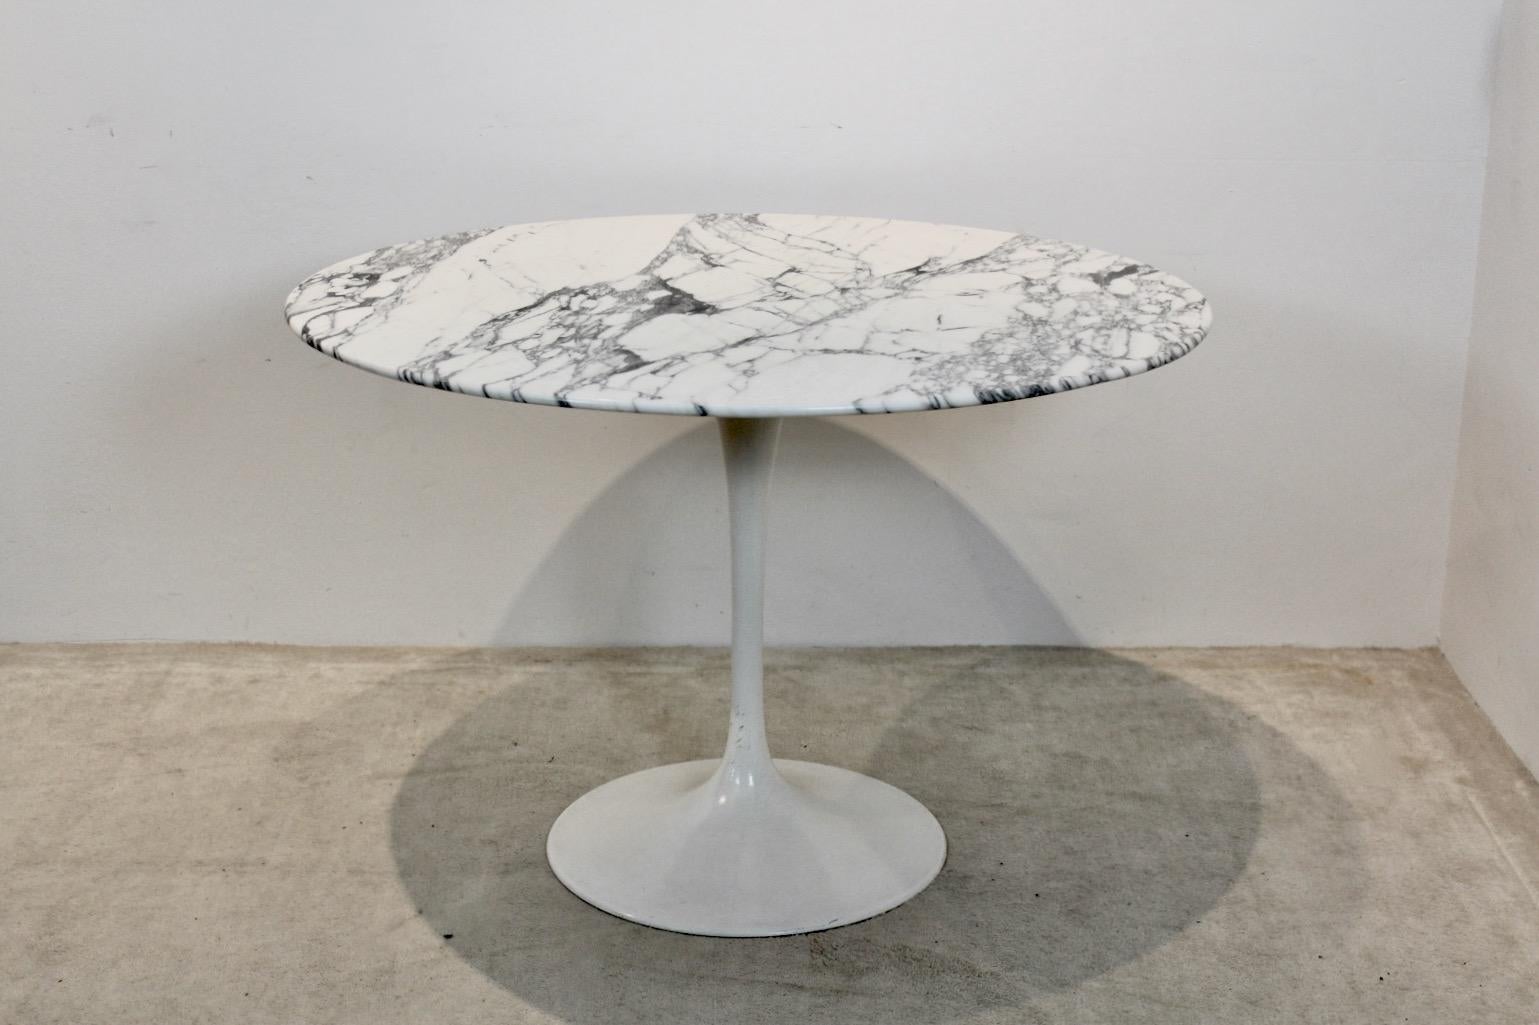 Sophisticated Tulip dining table by Finnish designer Eero Saarinen for Knoll International, 1990s. The table has a beautiful Calacatta Marble top and aluminum base, marked. In very good original condition, comes from 1st owner with some small wear